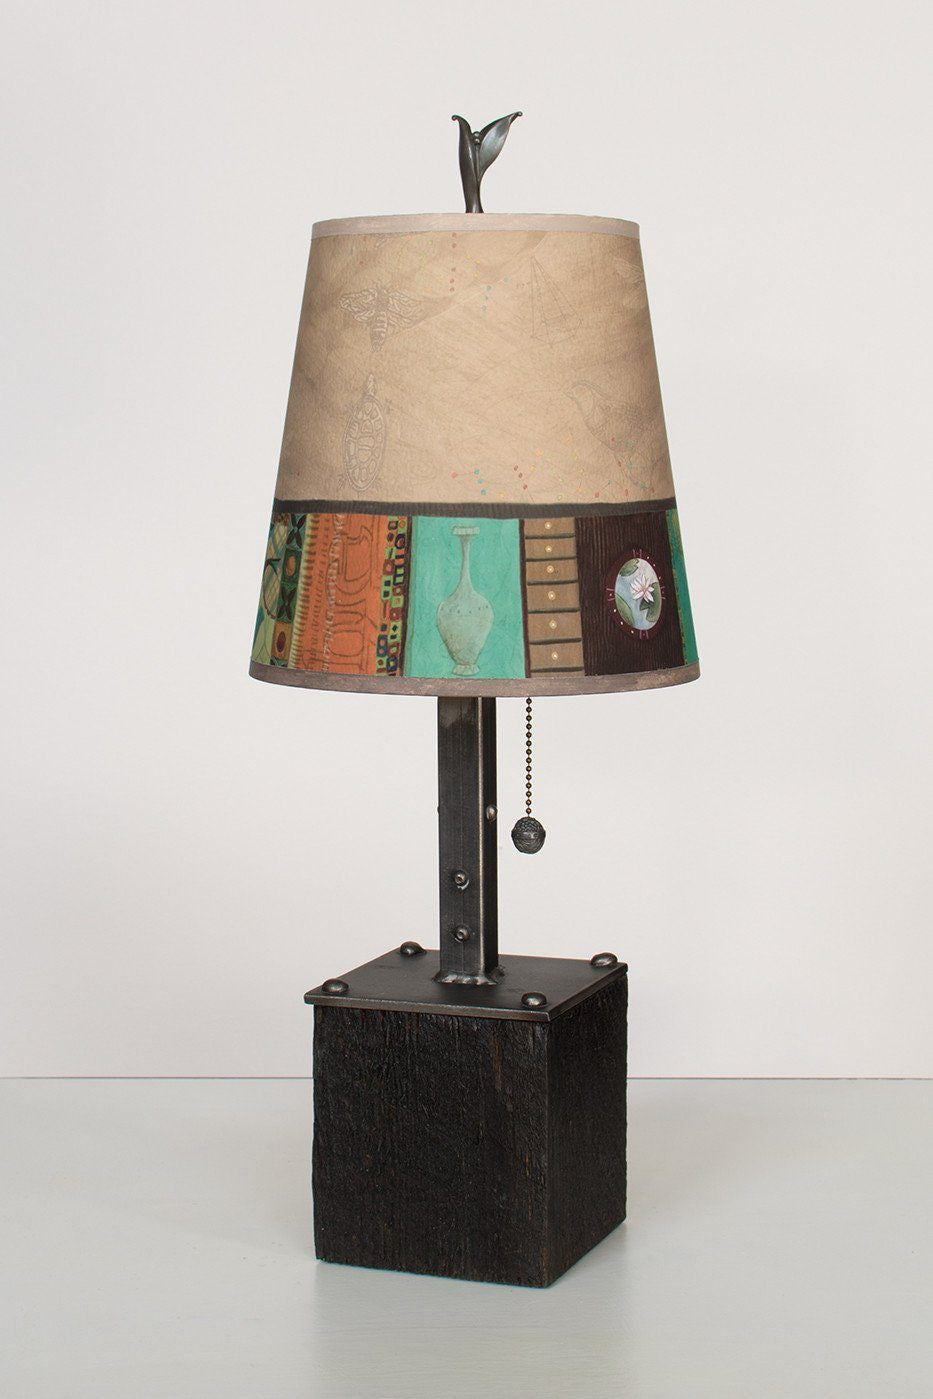 Janna Ugone & Co Table Lamps Steel Table Lamp on Reclaimed Wood with Small Drum Shade in Linen Match